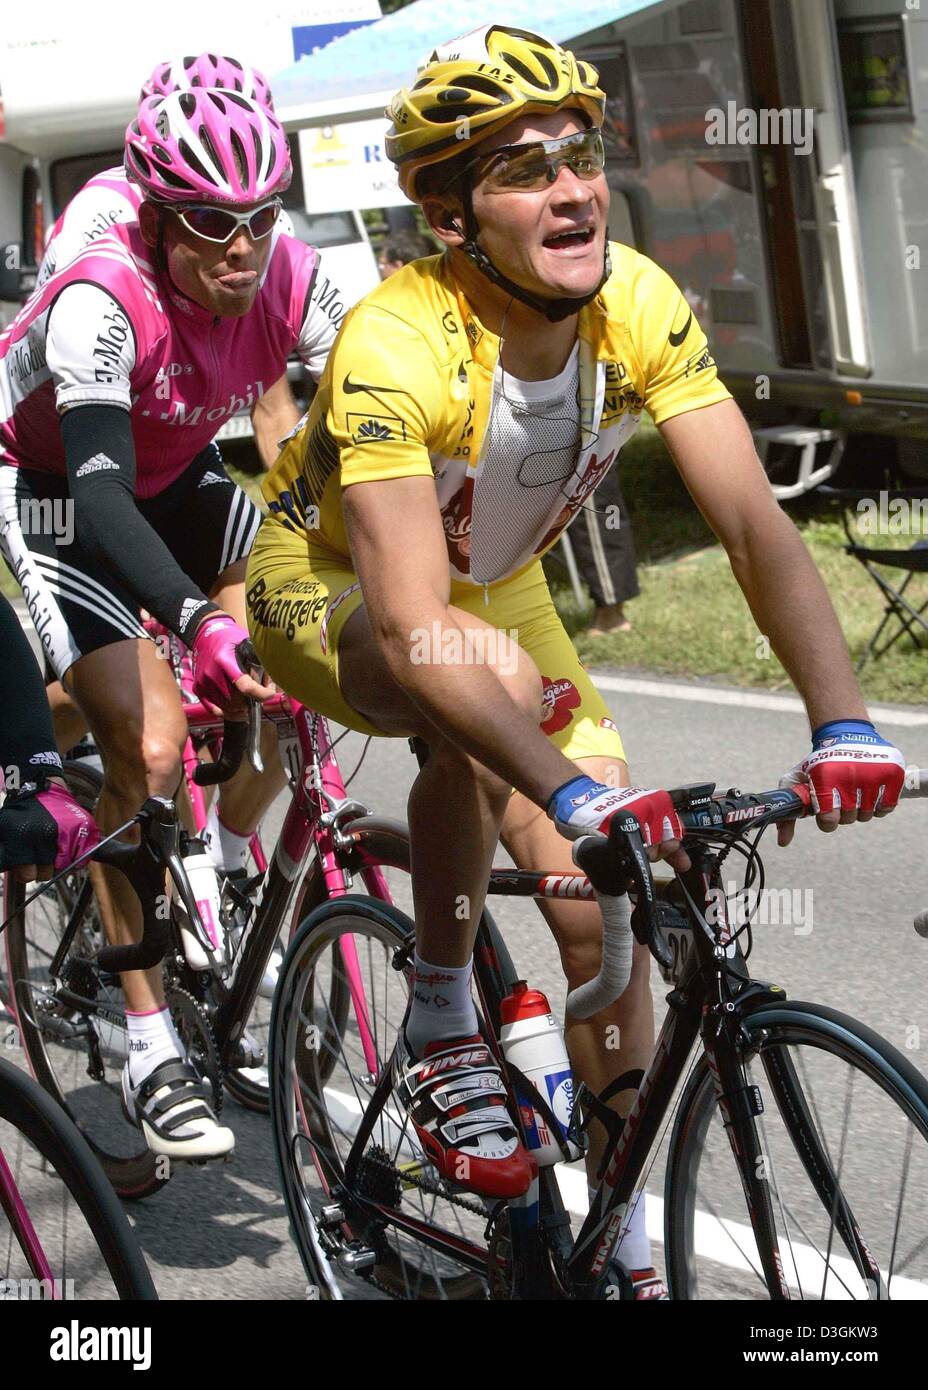 (dpa) - German cyclist Jan Ullrich (L) of team T-Mobile rides behind French cyclist Thomas Voeckler of team Brioches La Boulangere, who is wearing the yellow jersey of the overall leader, during the 9th stage of the Tour de France cycling race in France, 13 July 2004. The 160.5km long stage took the cyclists from Saint-Leonard-de-Noblat to Gueret. During the 10th stage Voeckler wea Stock Photo